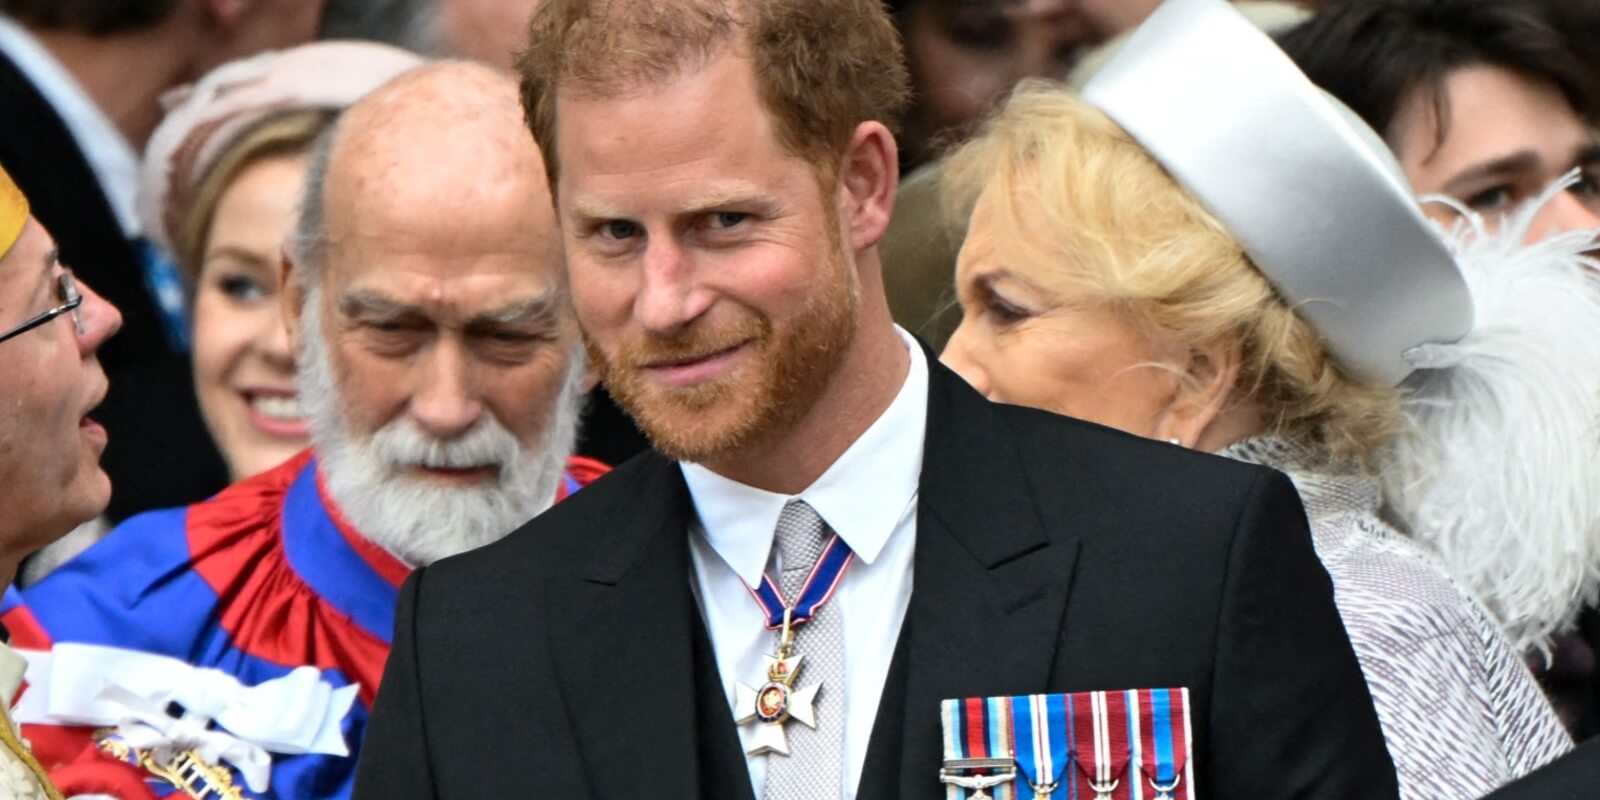 Prince Harry attends King Charles' coronation on May 6, 2023 the same day as his son, Prince Archie's, fourth birthday.